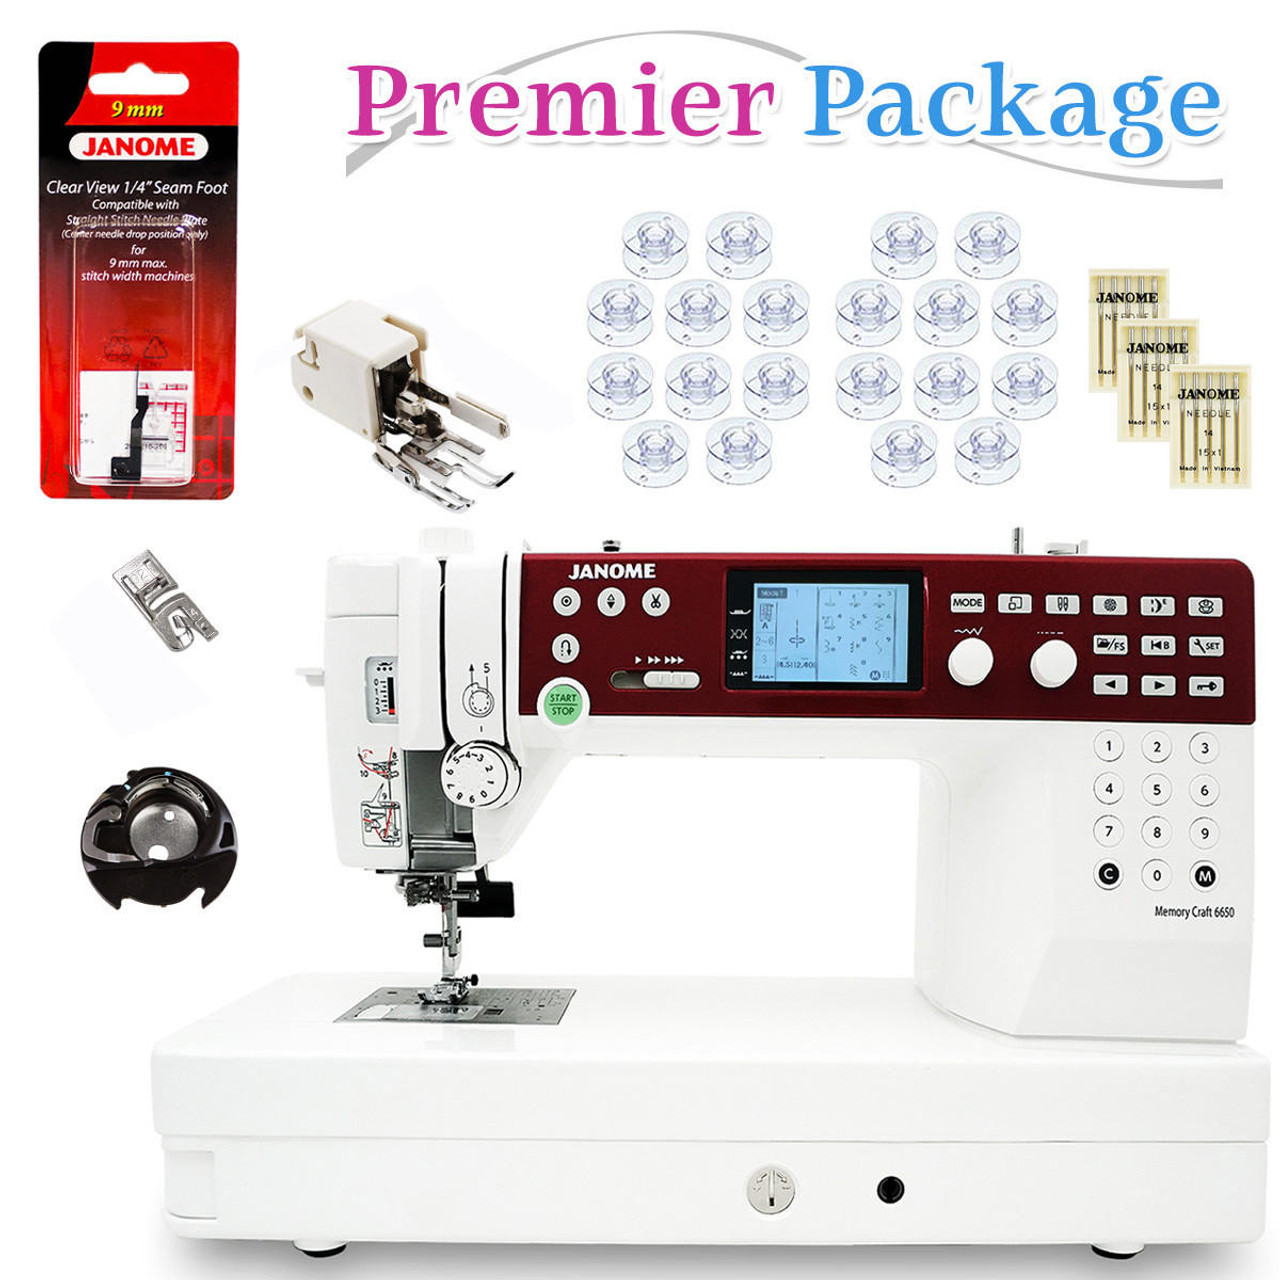 https://cdn11.bigcommerce.com/s-b8620/images/stencil/1280x1280/products/23208/92223/janome-mc6650-sewing-and-quilting-machine-with-premier-package__35314.1688839110.jpg?c=2